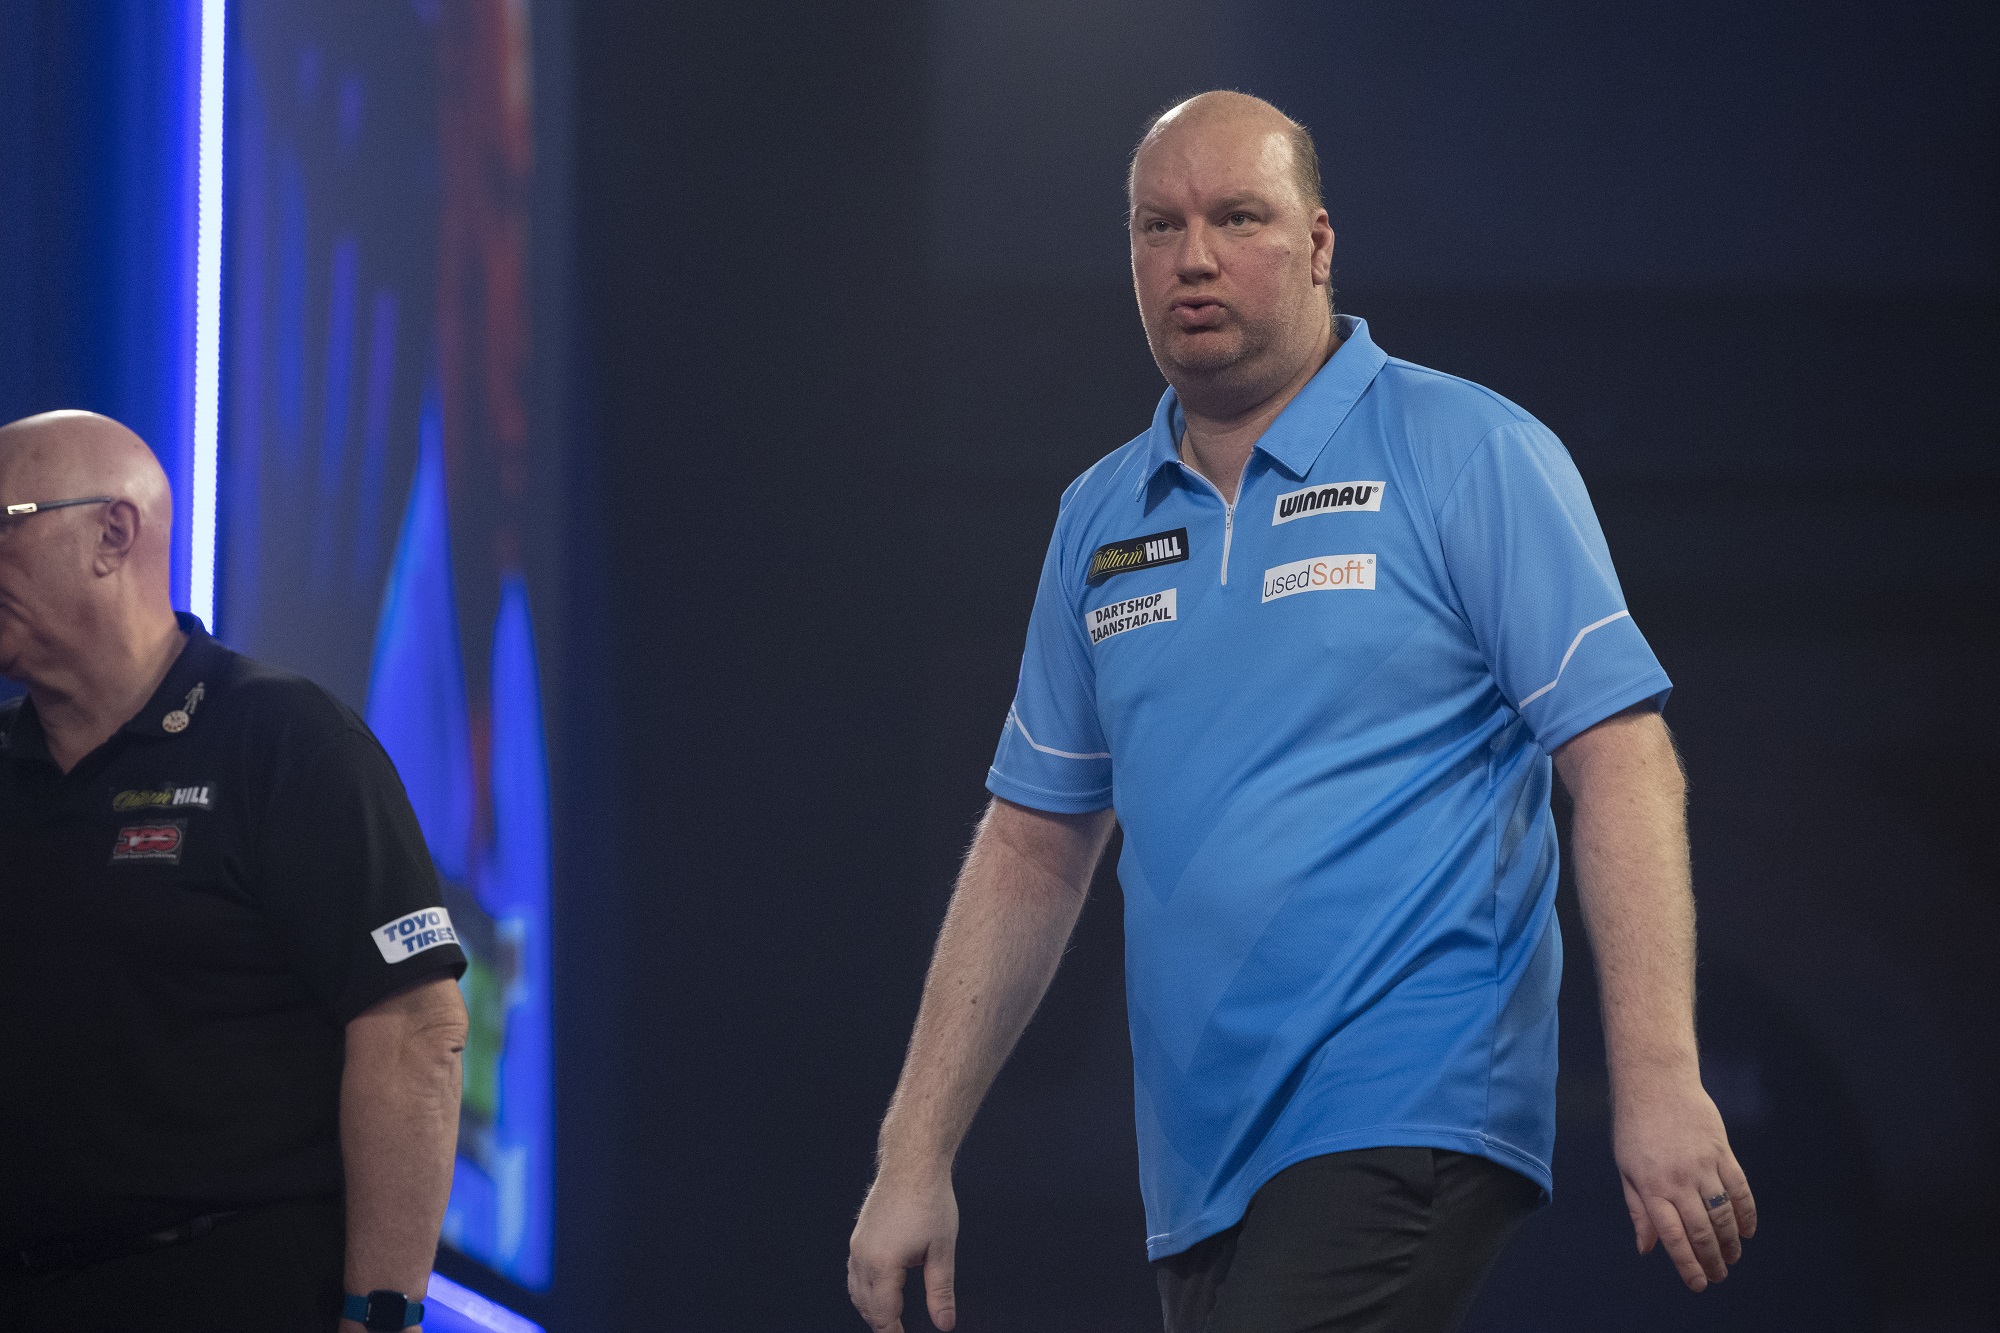 Van der Voort out of PDC World Championship with Covid